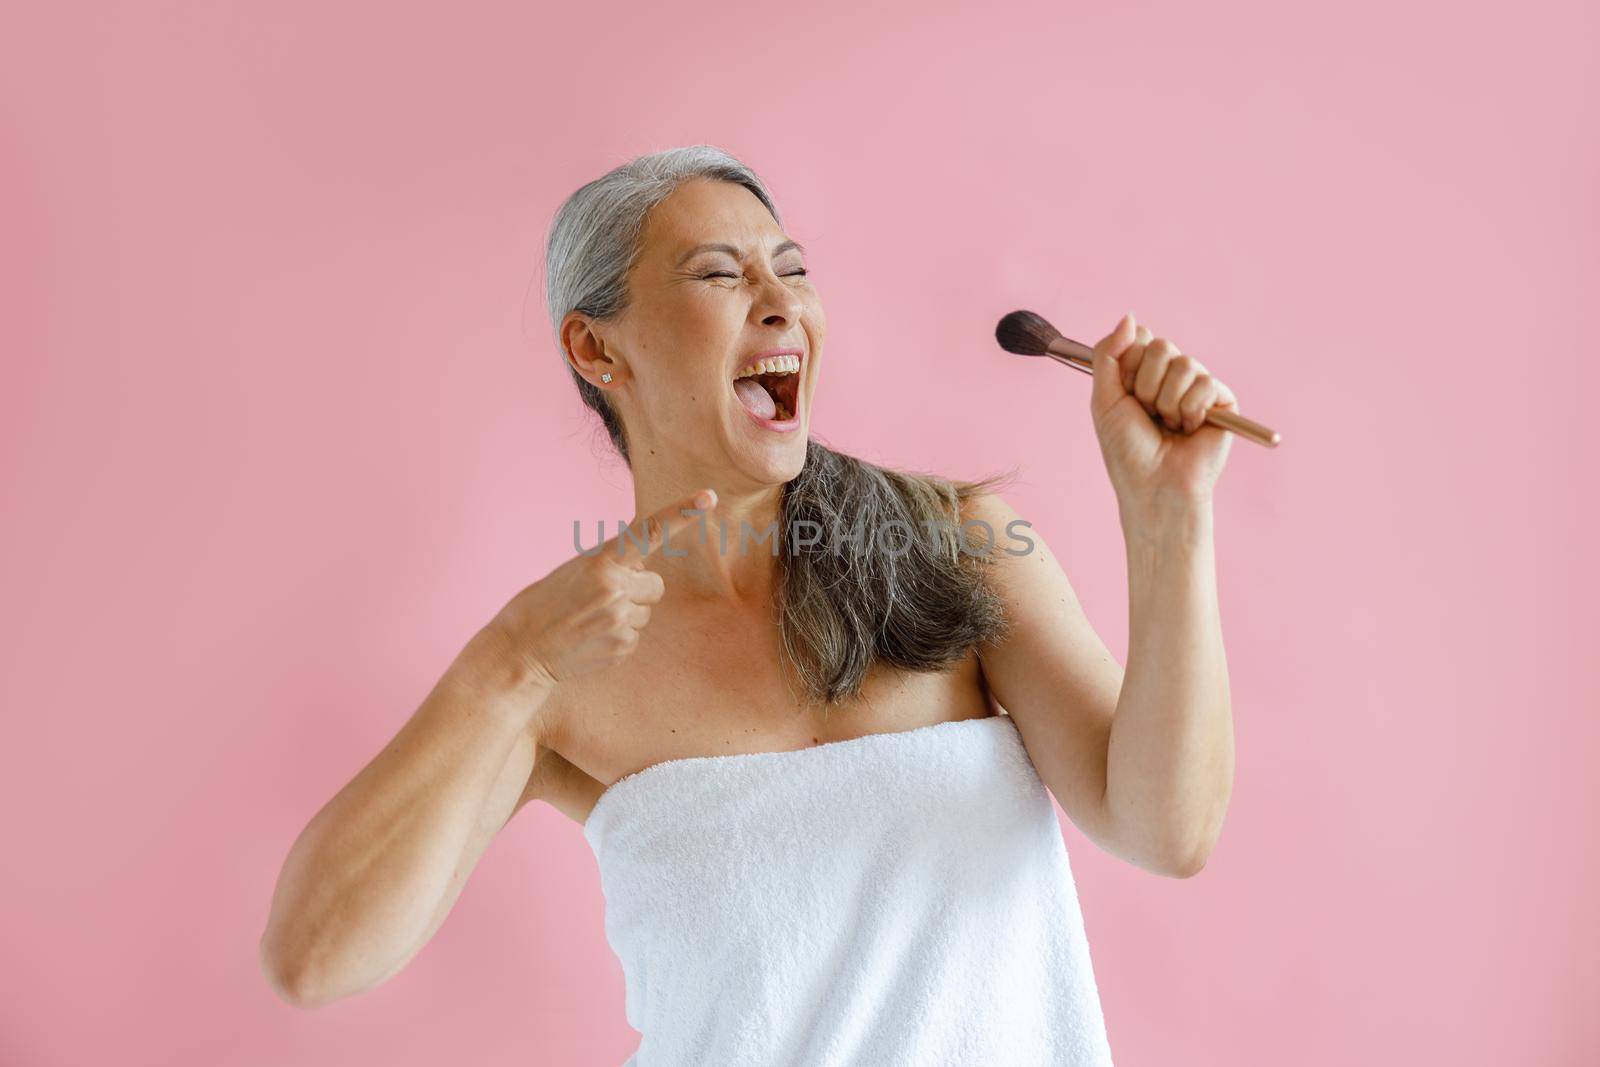 Excited middle aged Asian model wrapped with terry towel sings song holding cosmetic brush on pink background in studio. Mature beauty lifestyle